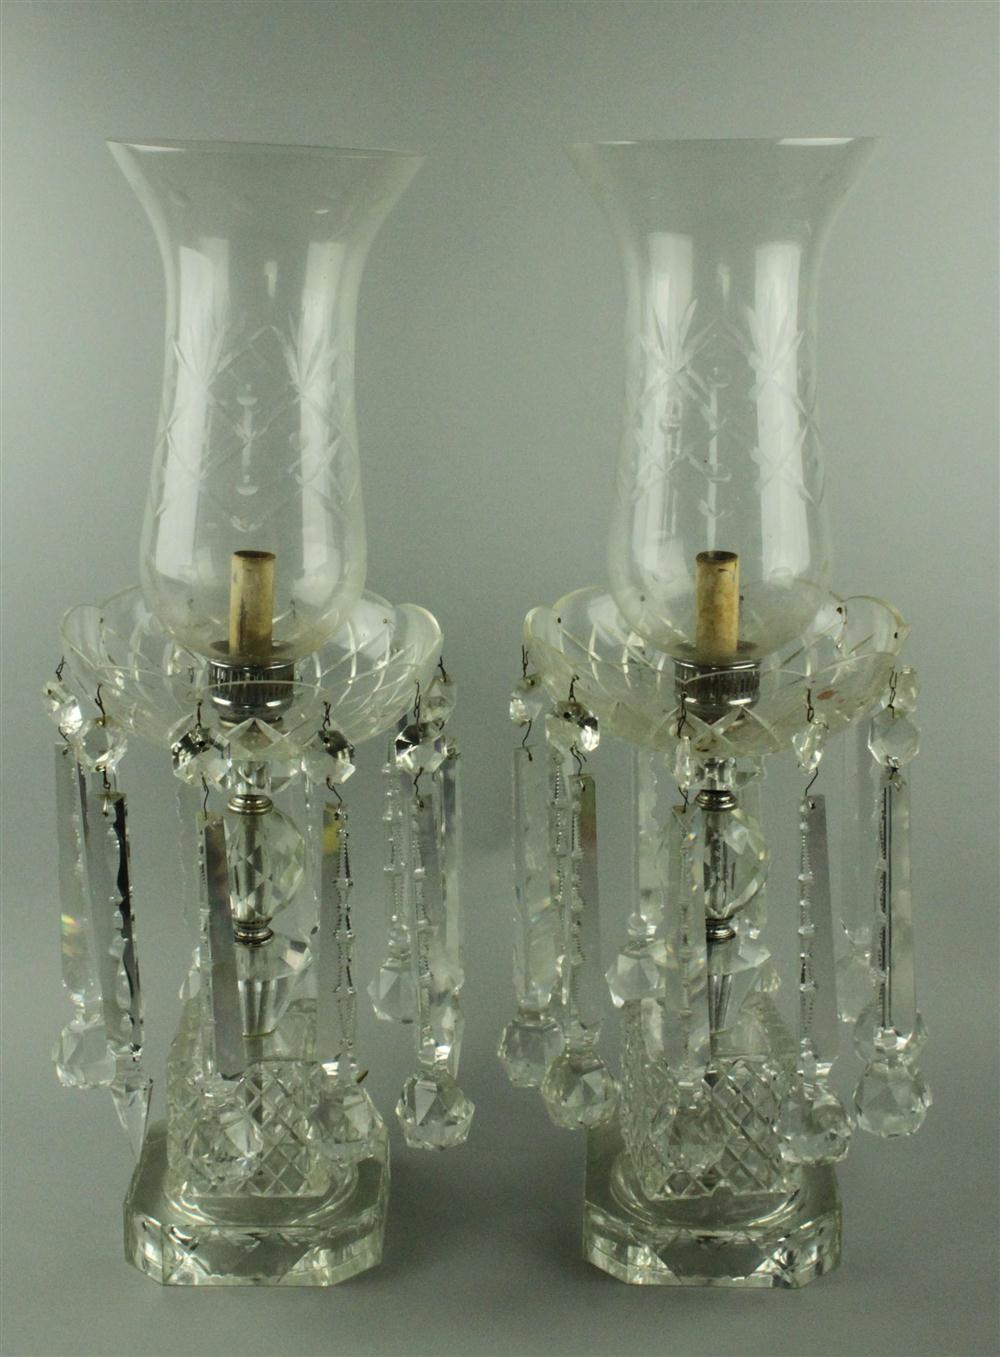 PAIR OF LARGE GLASS ELECTRIC LUSTRES